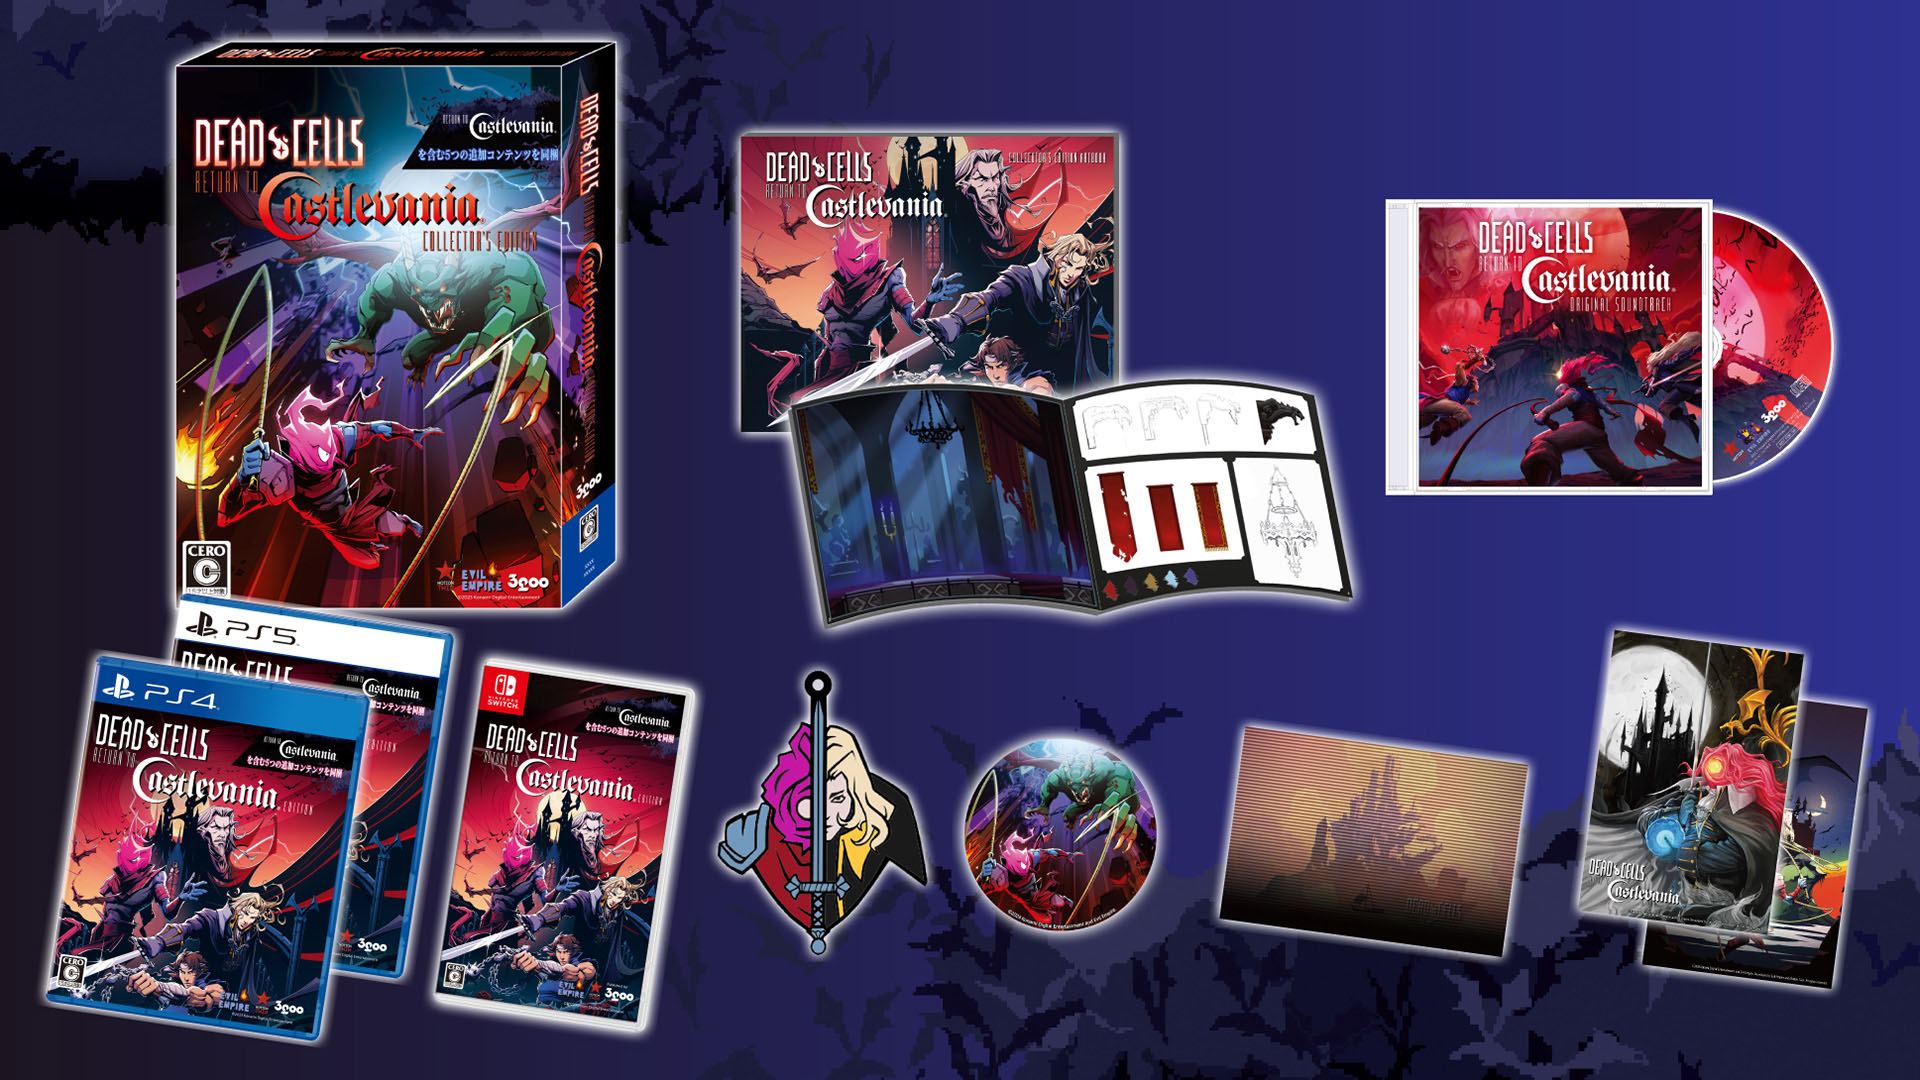 Dead Cells: Return to Castlevania for Nintendo Switch - Nintendo Official  Site